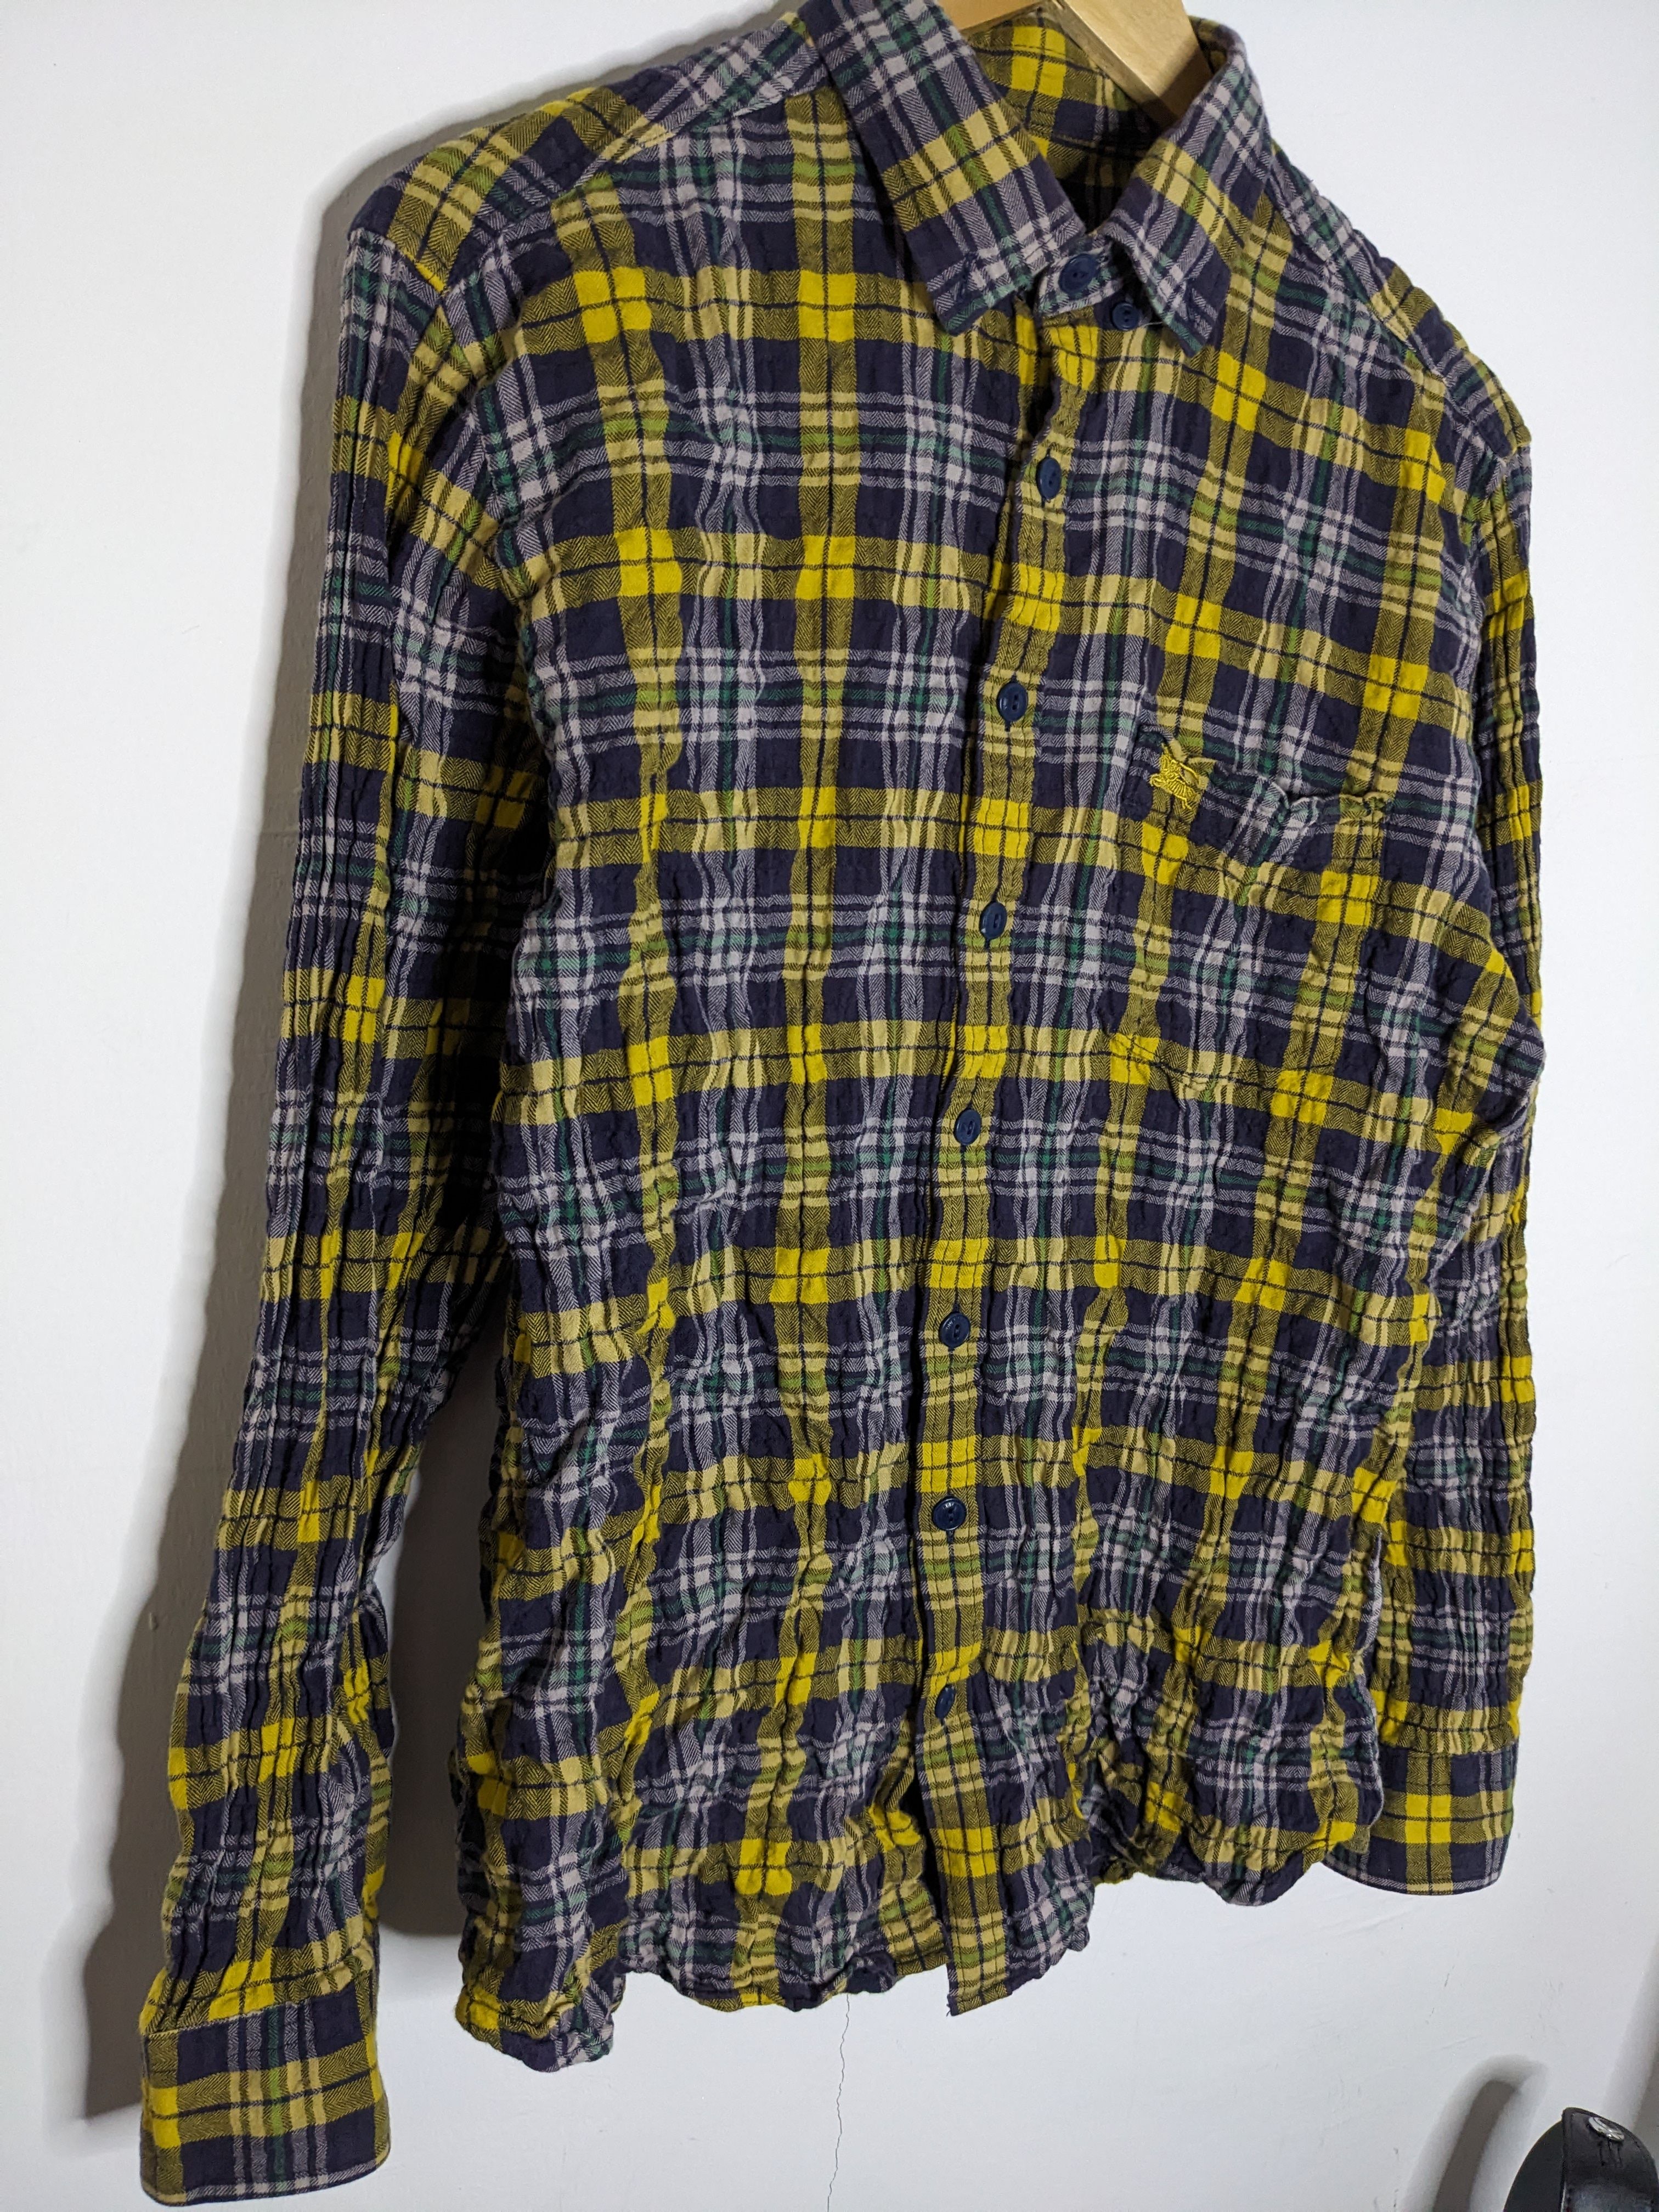 Burberry London Wrinkle Style Checked Plaid Flannel Shirt - 1